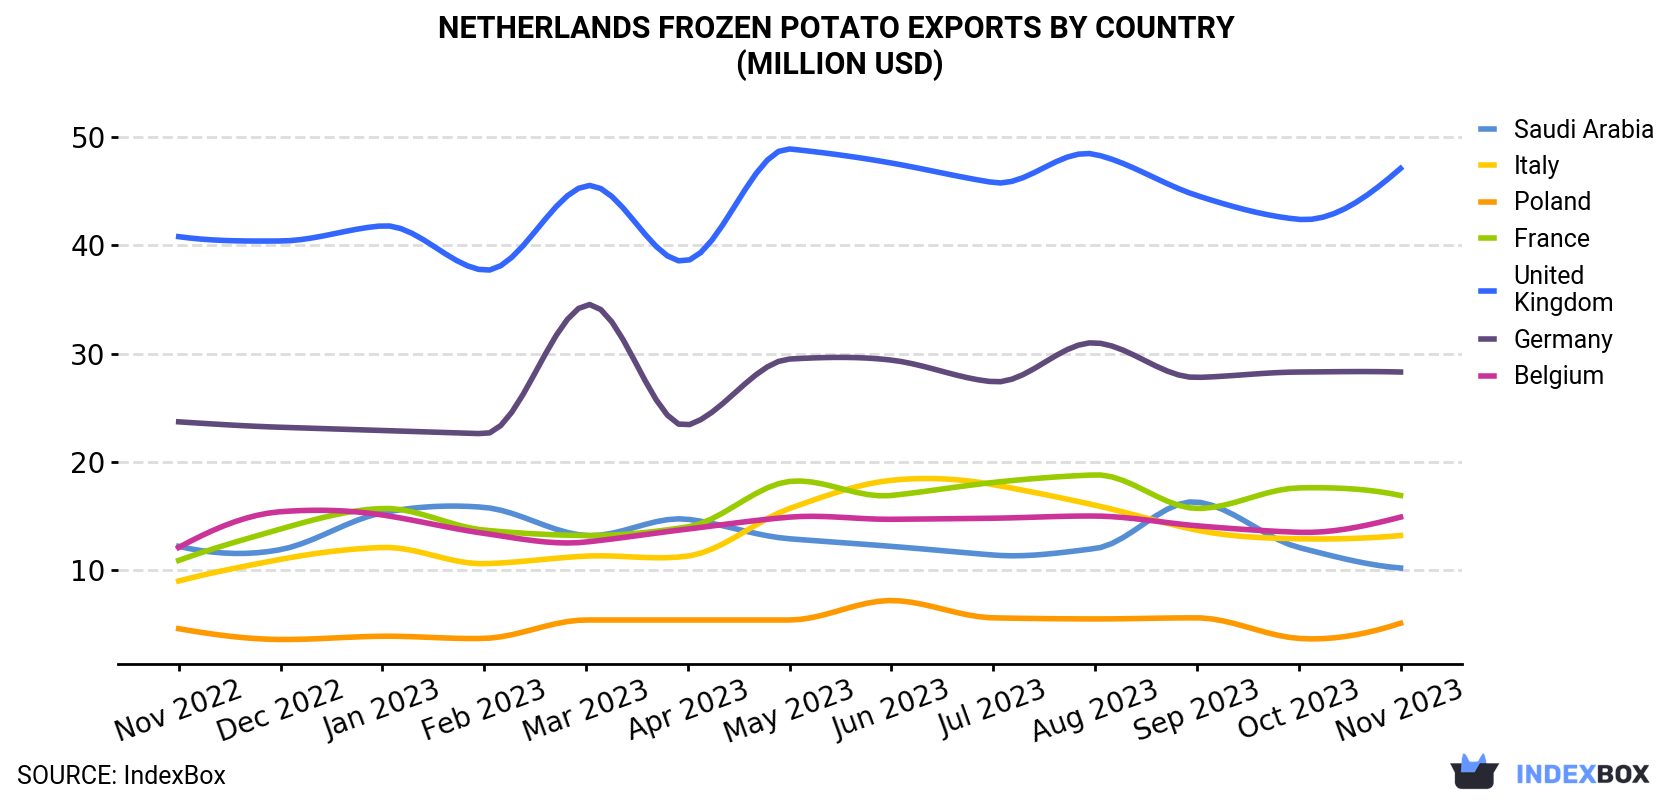 Netherlands Frozen Potato Exports By Country (Million USD)